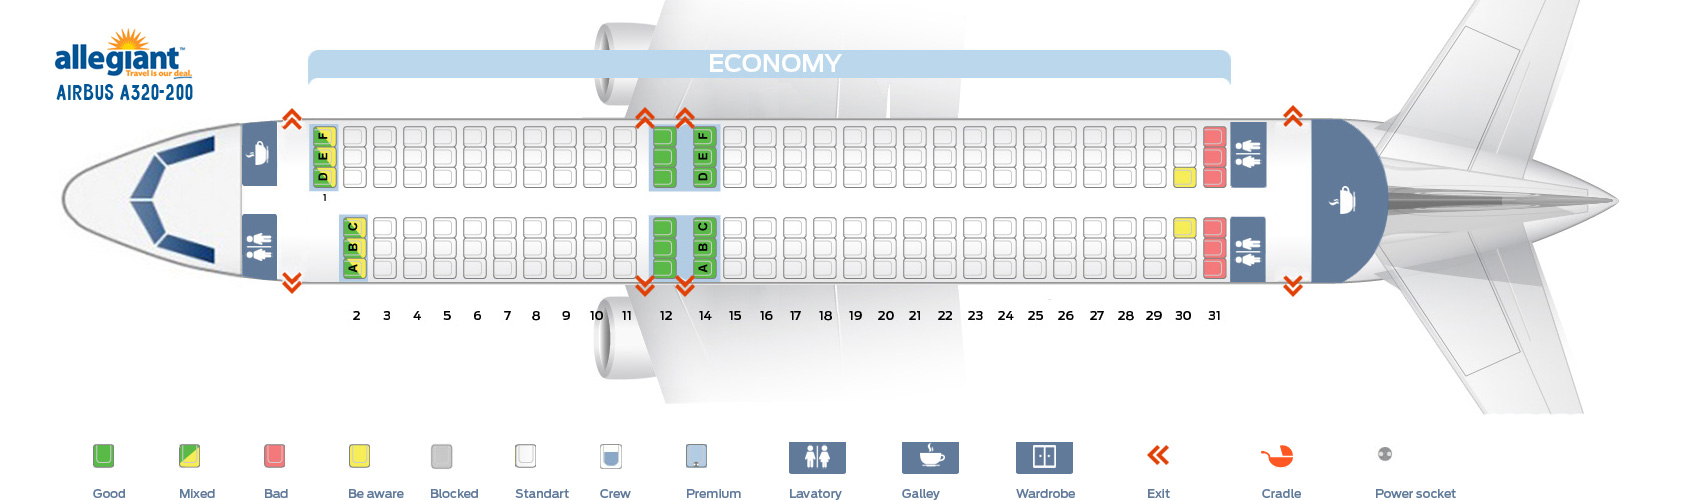 Seat map Airbus A320200 Allegiant Air. Best seats in the plane